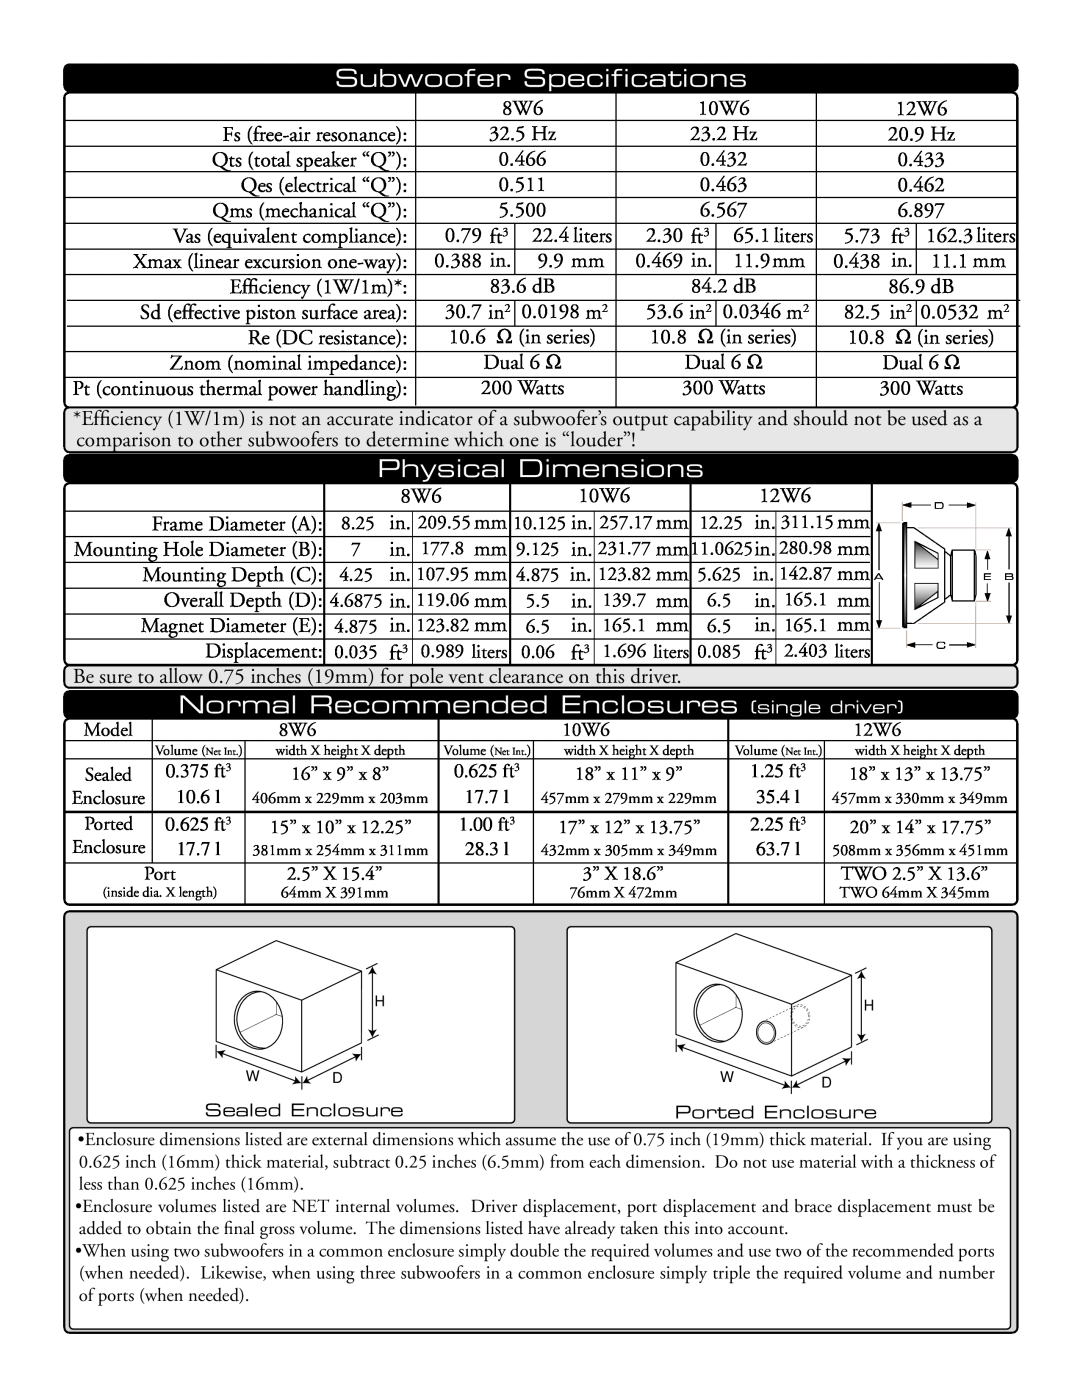 JL Audio 18W6 dimensions Subwoofer Speciﬁcations, Physical Dimensions, Normal Recommended Enclosures single driver 